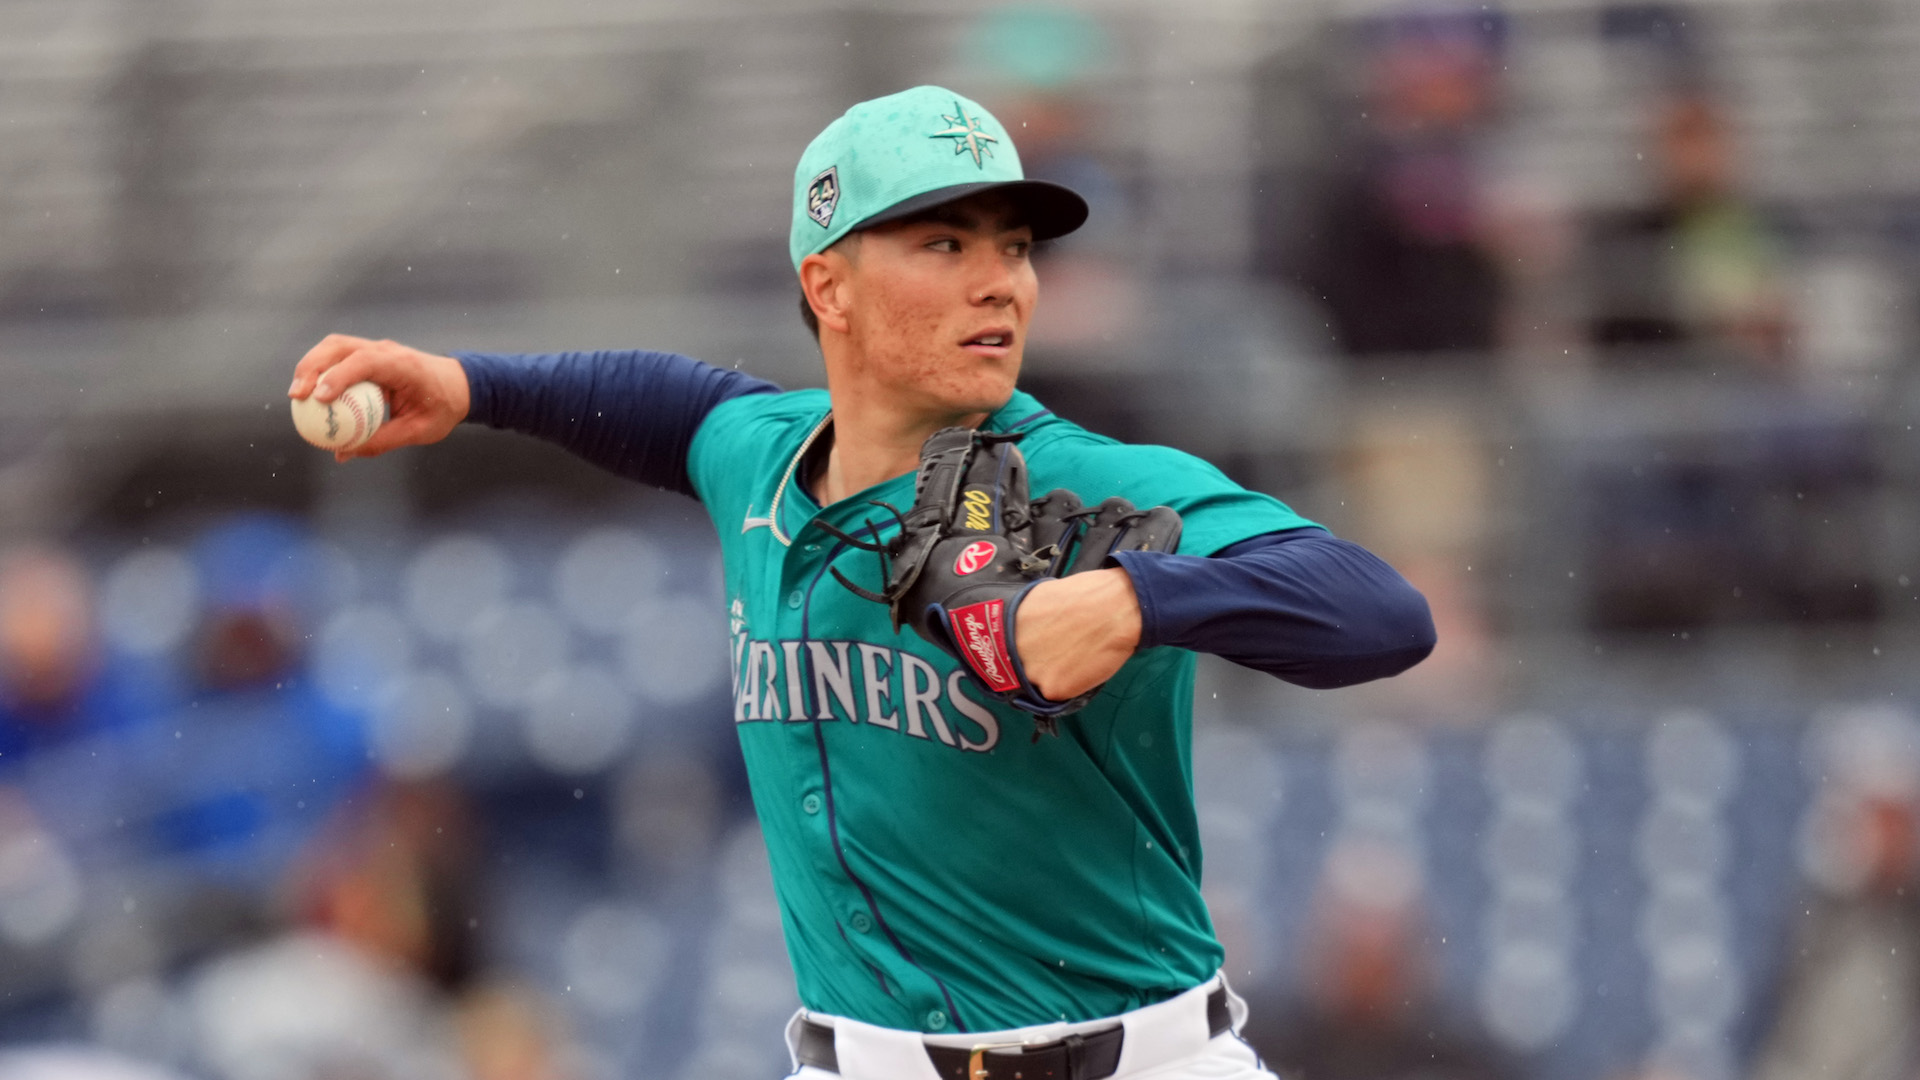 Bryan Woo #22 of the Seattle Mariners throws in the first inning during a spring training game against the Los Angeles Angels.